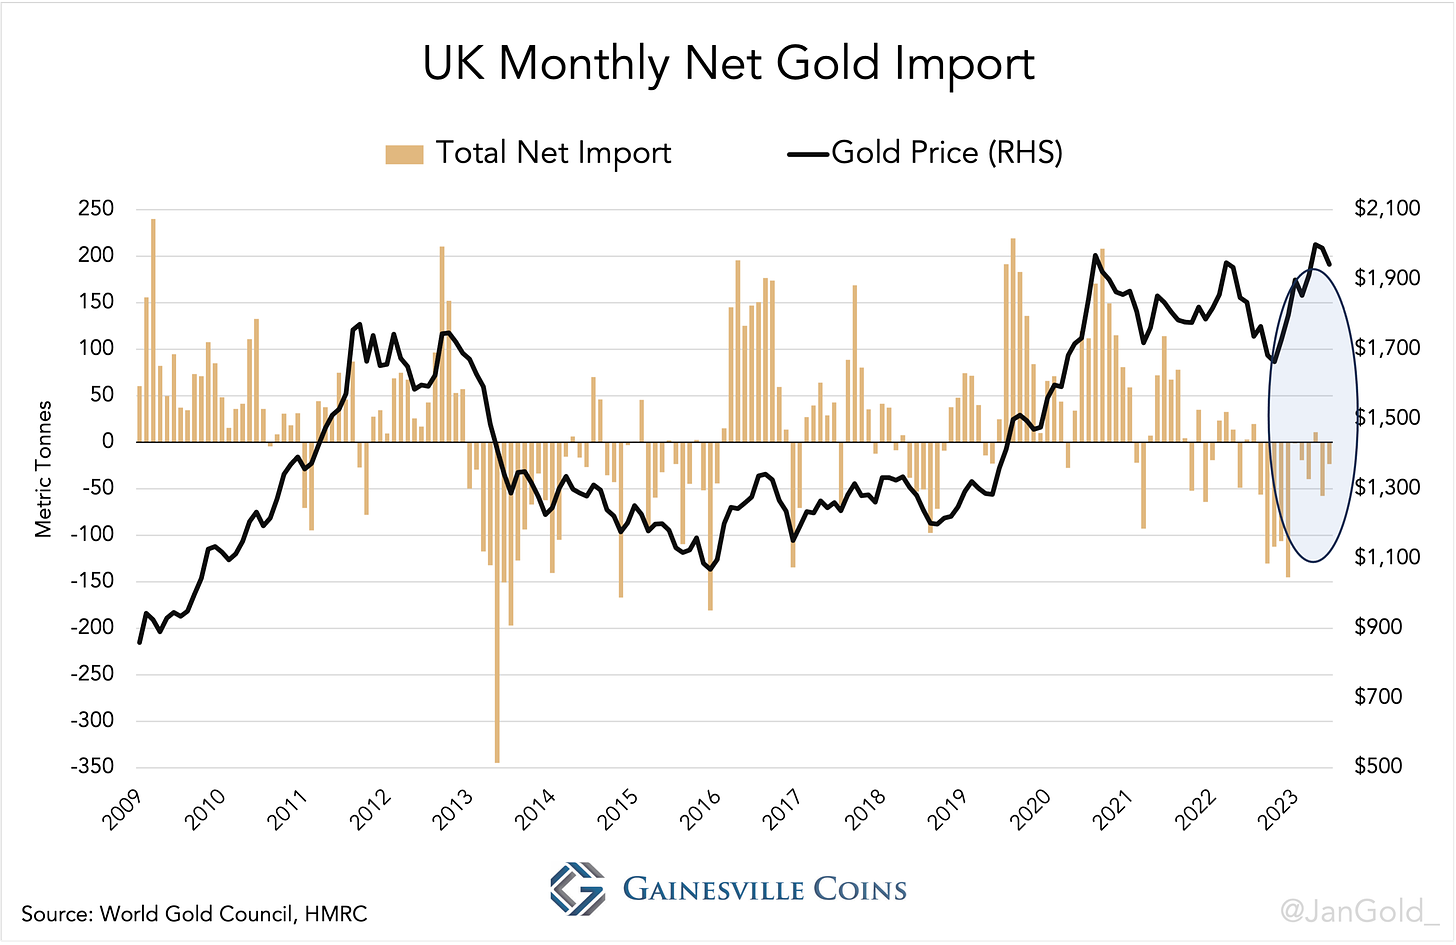 chart showing UK monthly net gold imports since 2009